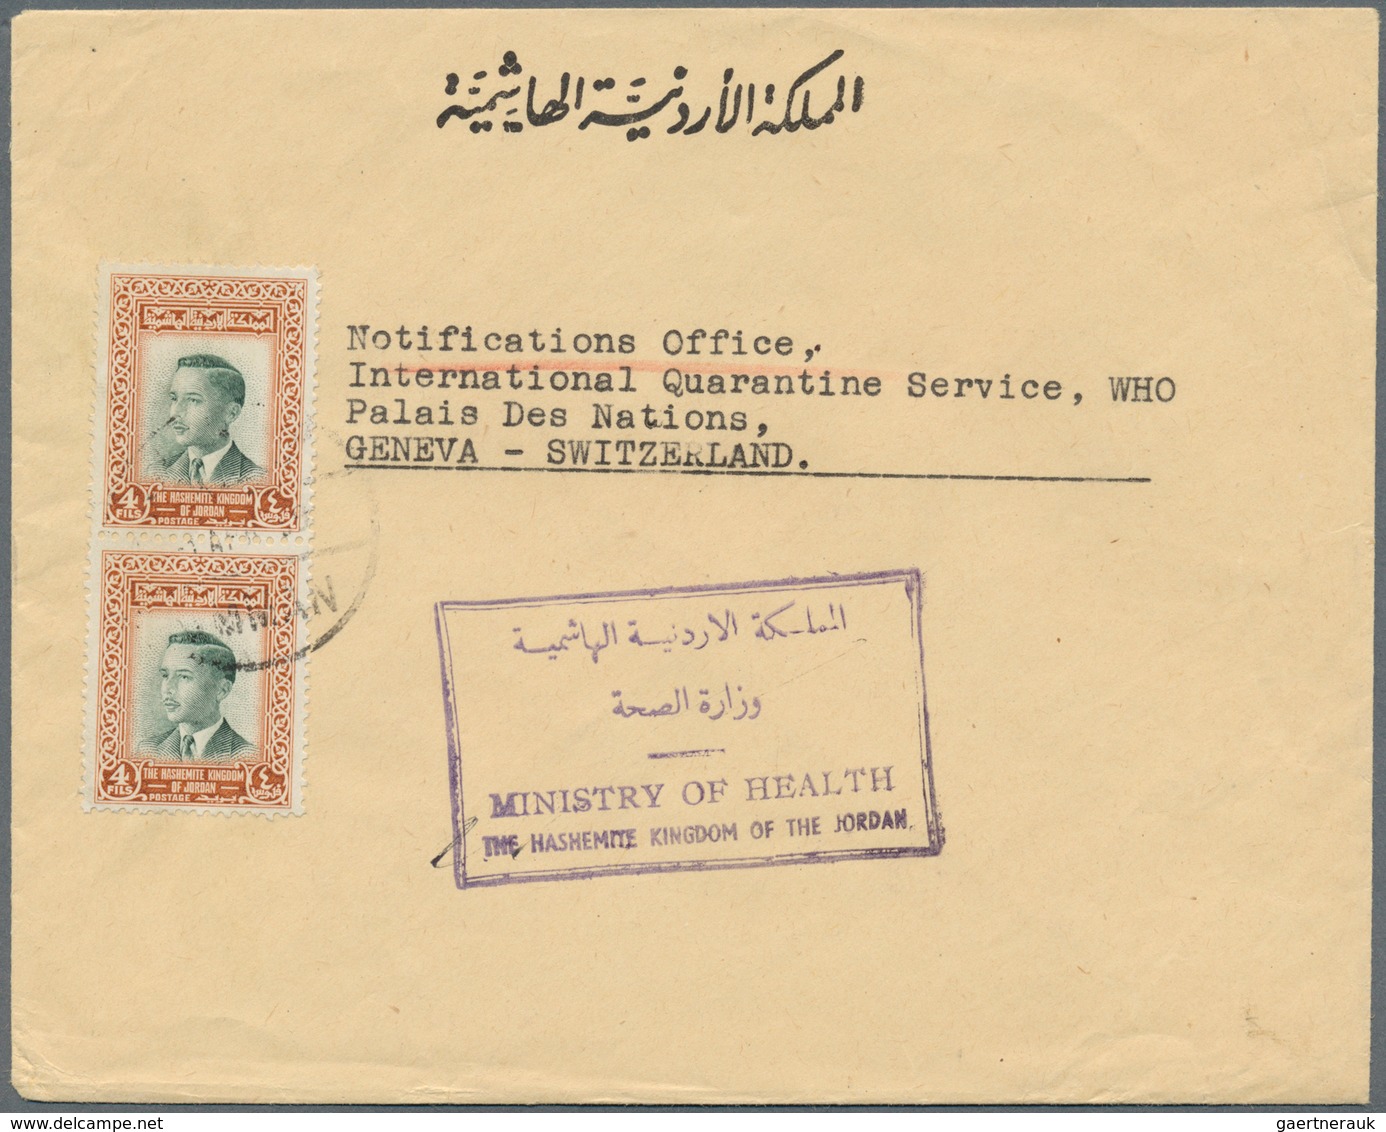 Jordanien: 1948 - 1979, 37 Covers, Nice Collection Of Covers And Some Postal Stationery, Good Franki - Jordanië